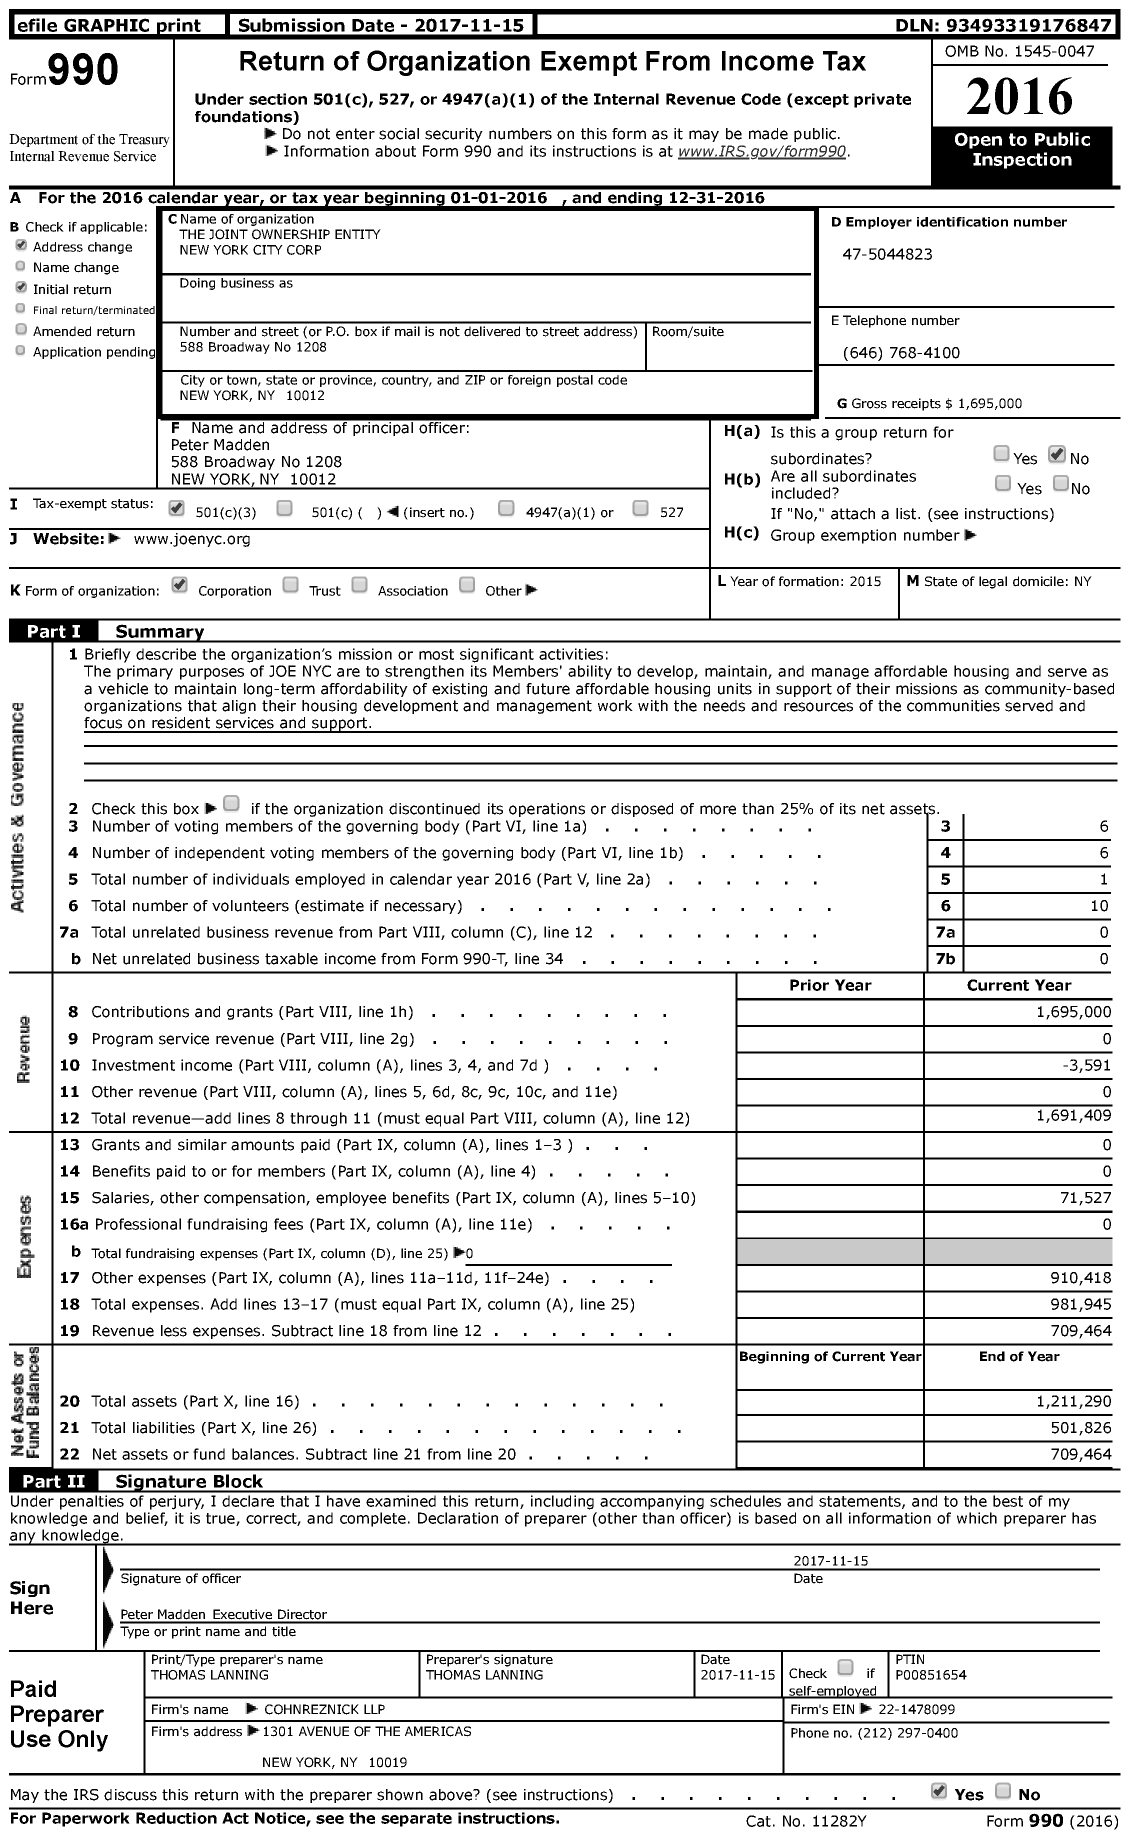 Image of first page of 2016 Form 990 for The Joint Ownership Entity New York City Corporation